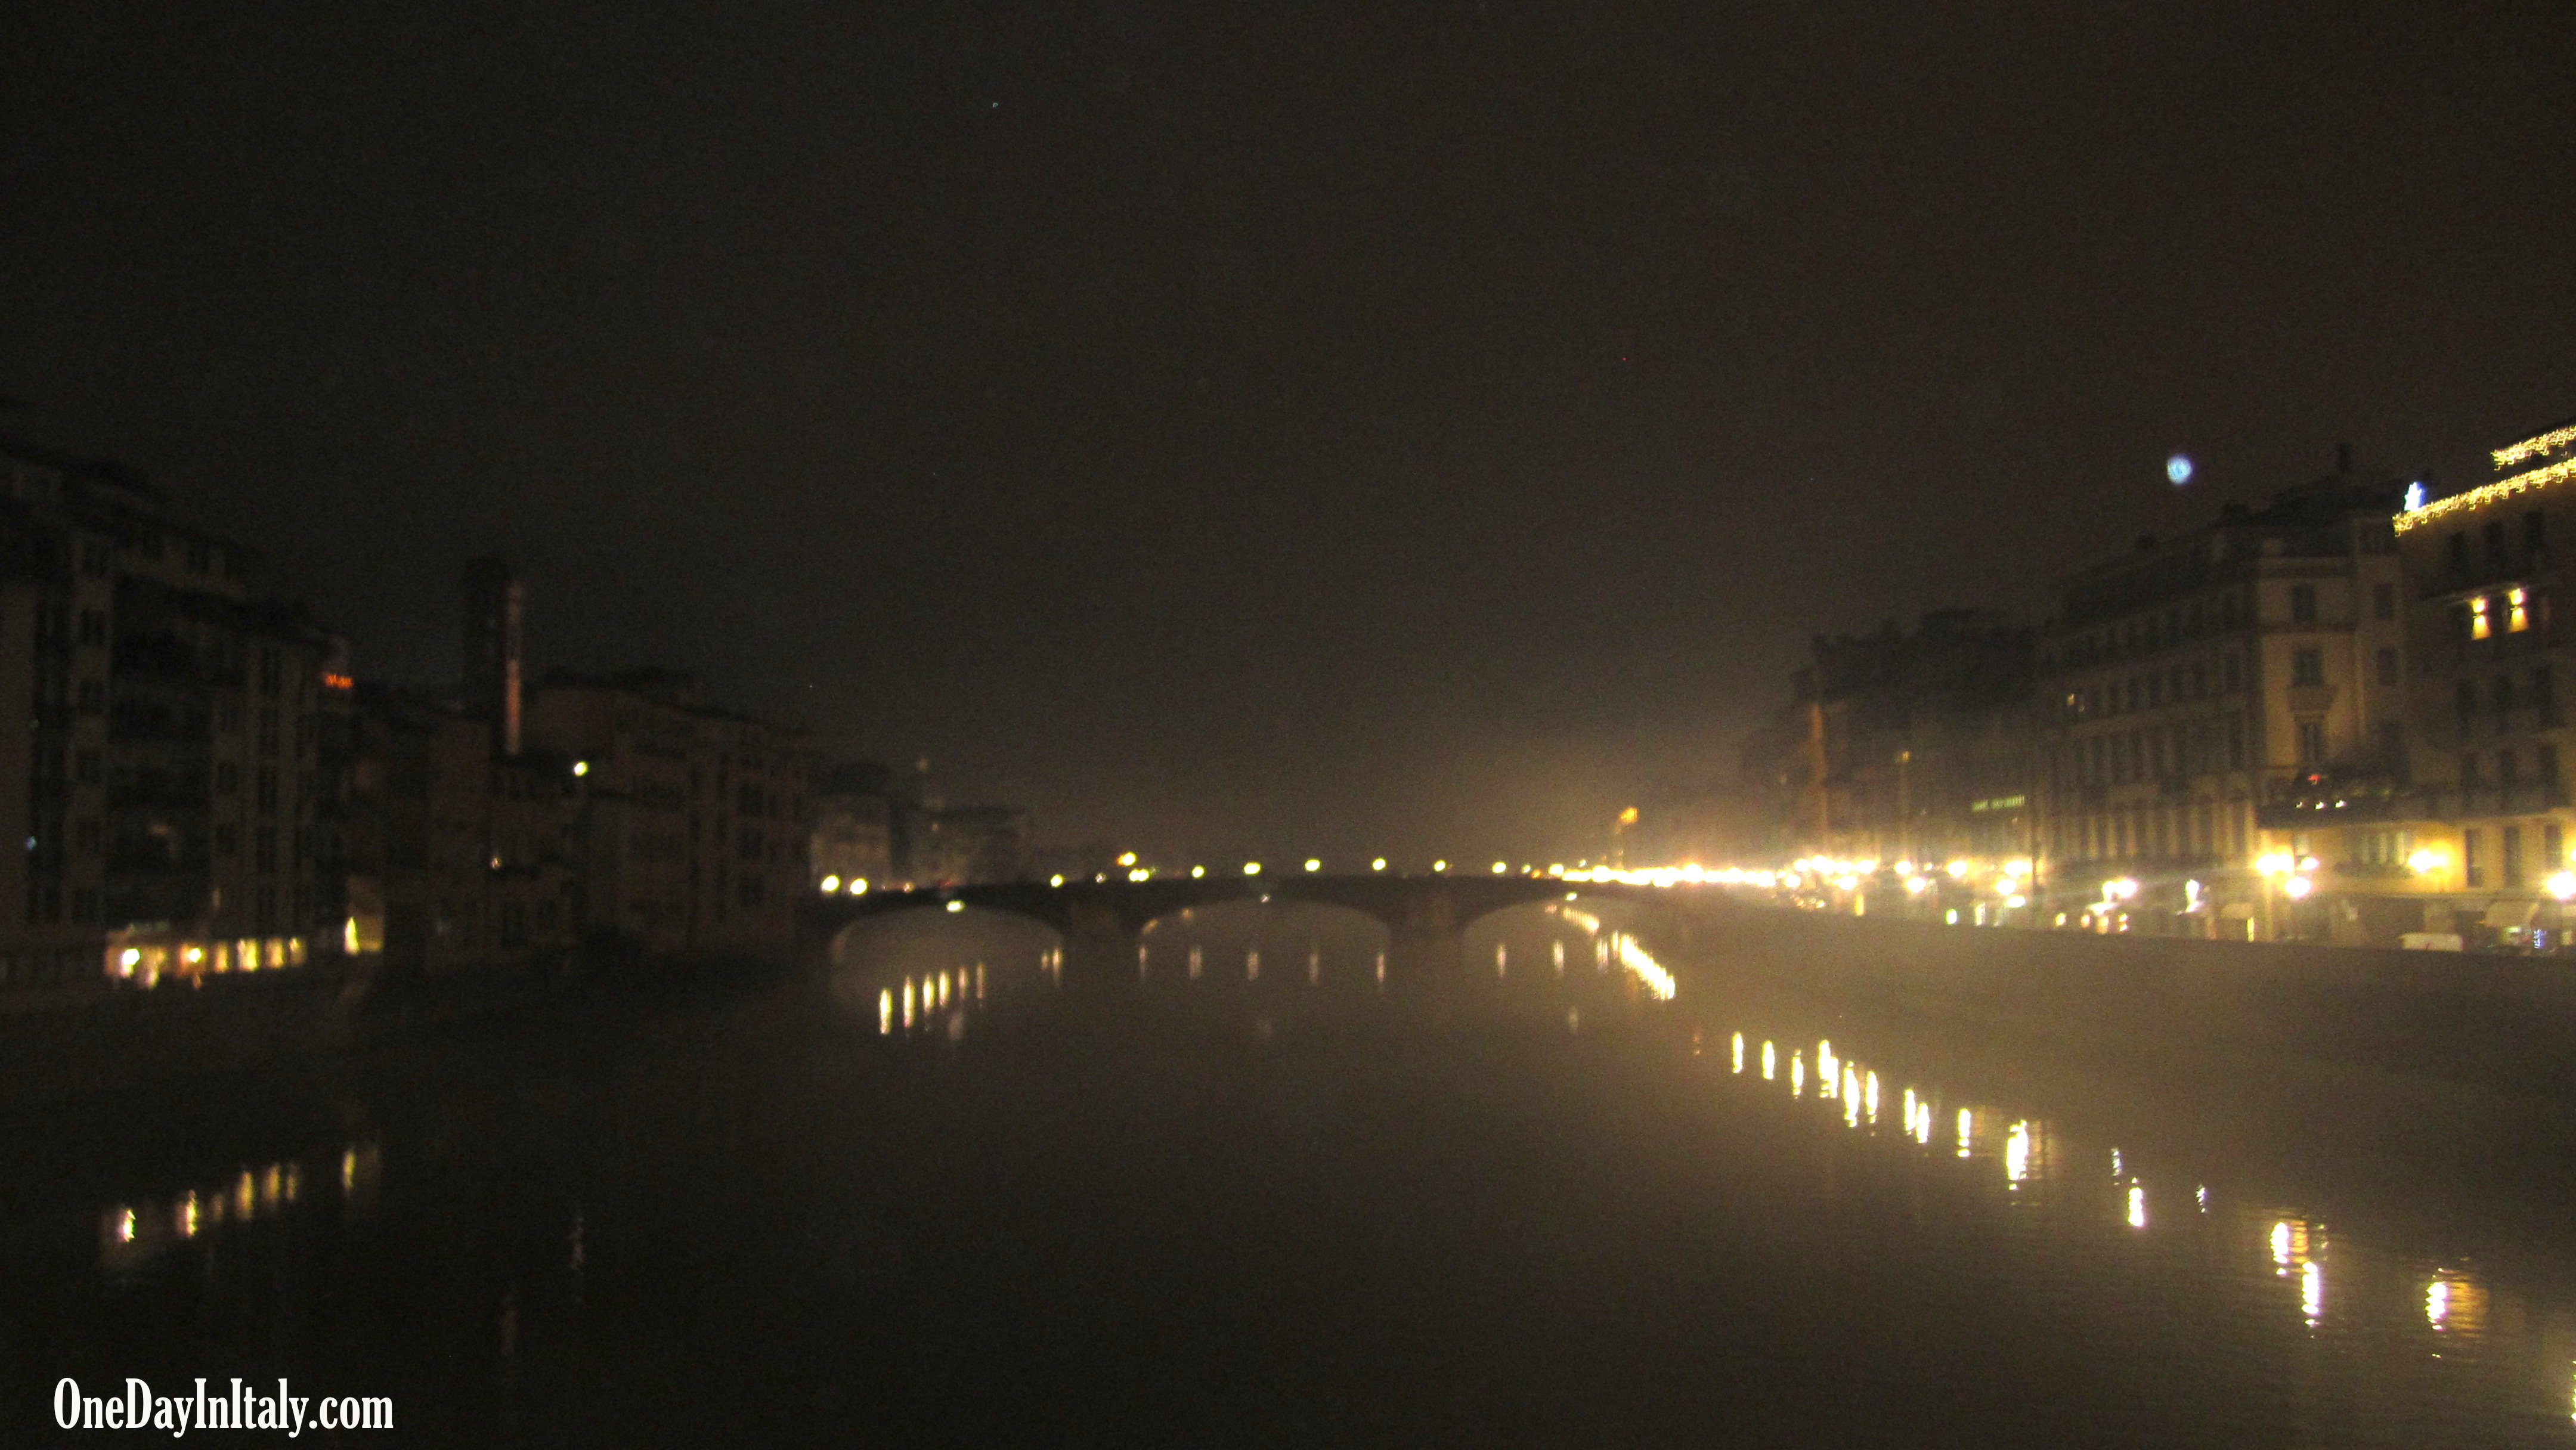 The River Arno, Florence